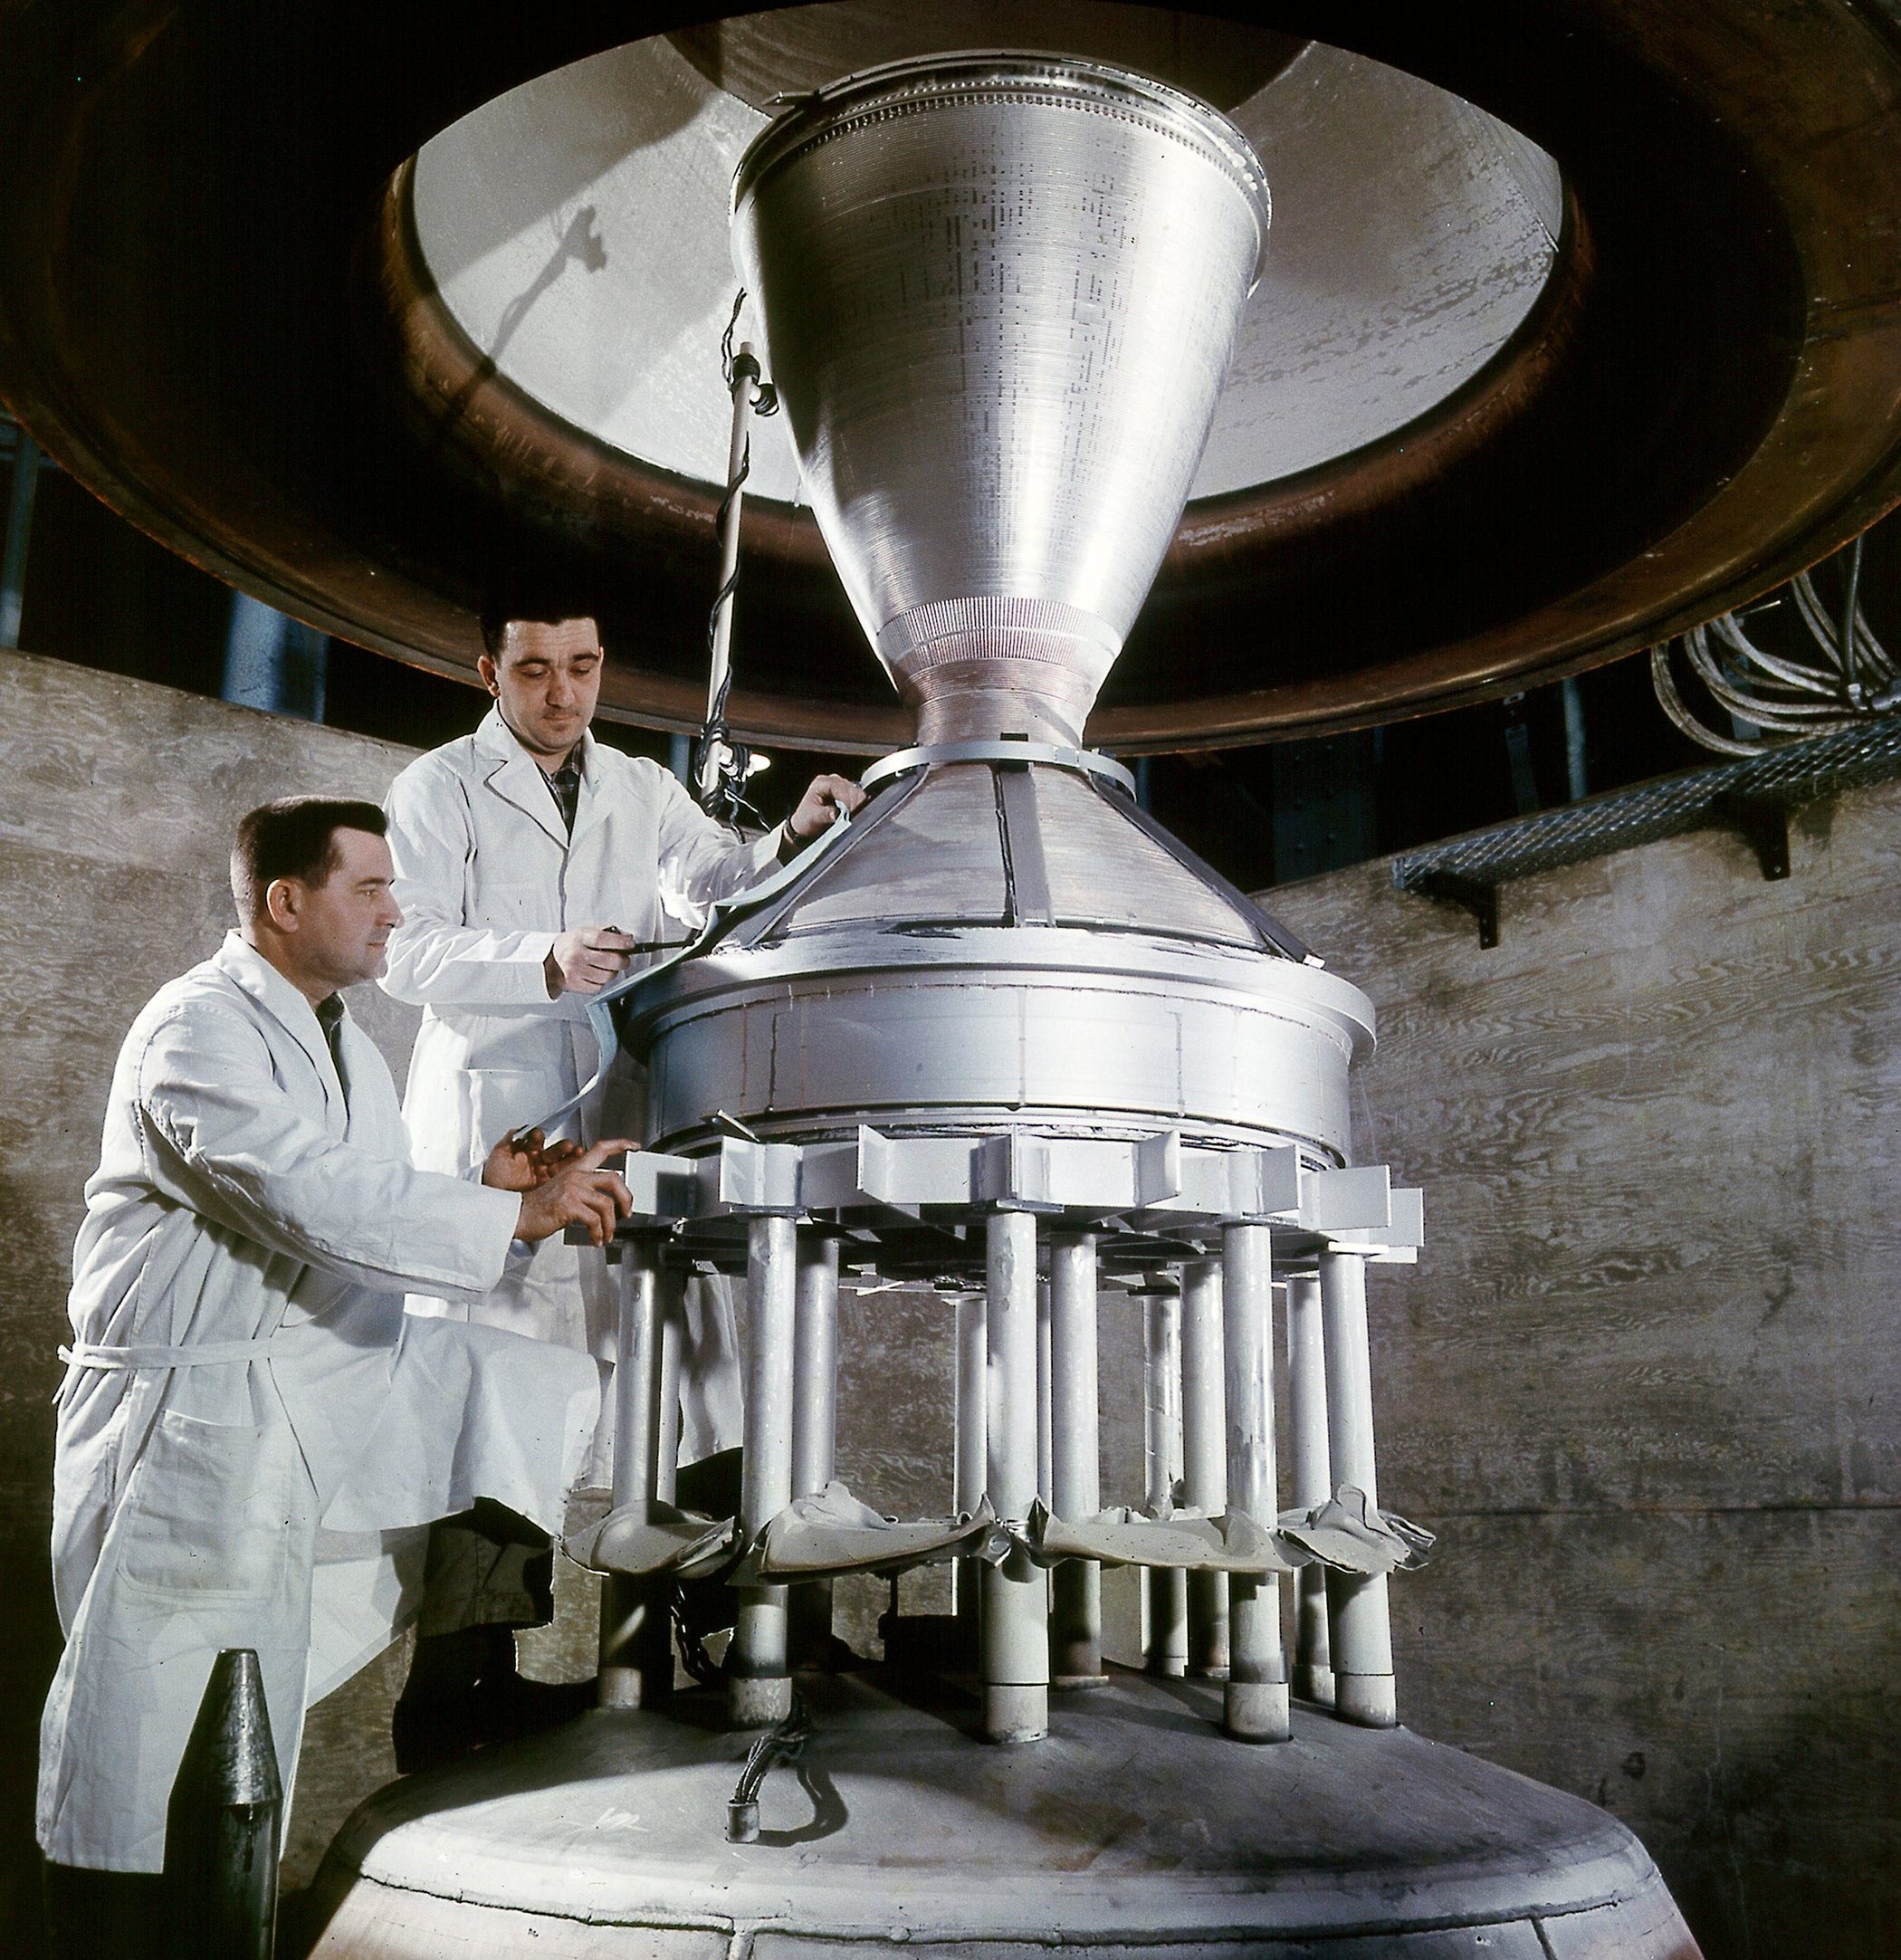 Technicians at work on a conceptual nuclear rocket in 1964. (Photo: NASA)